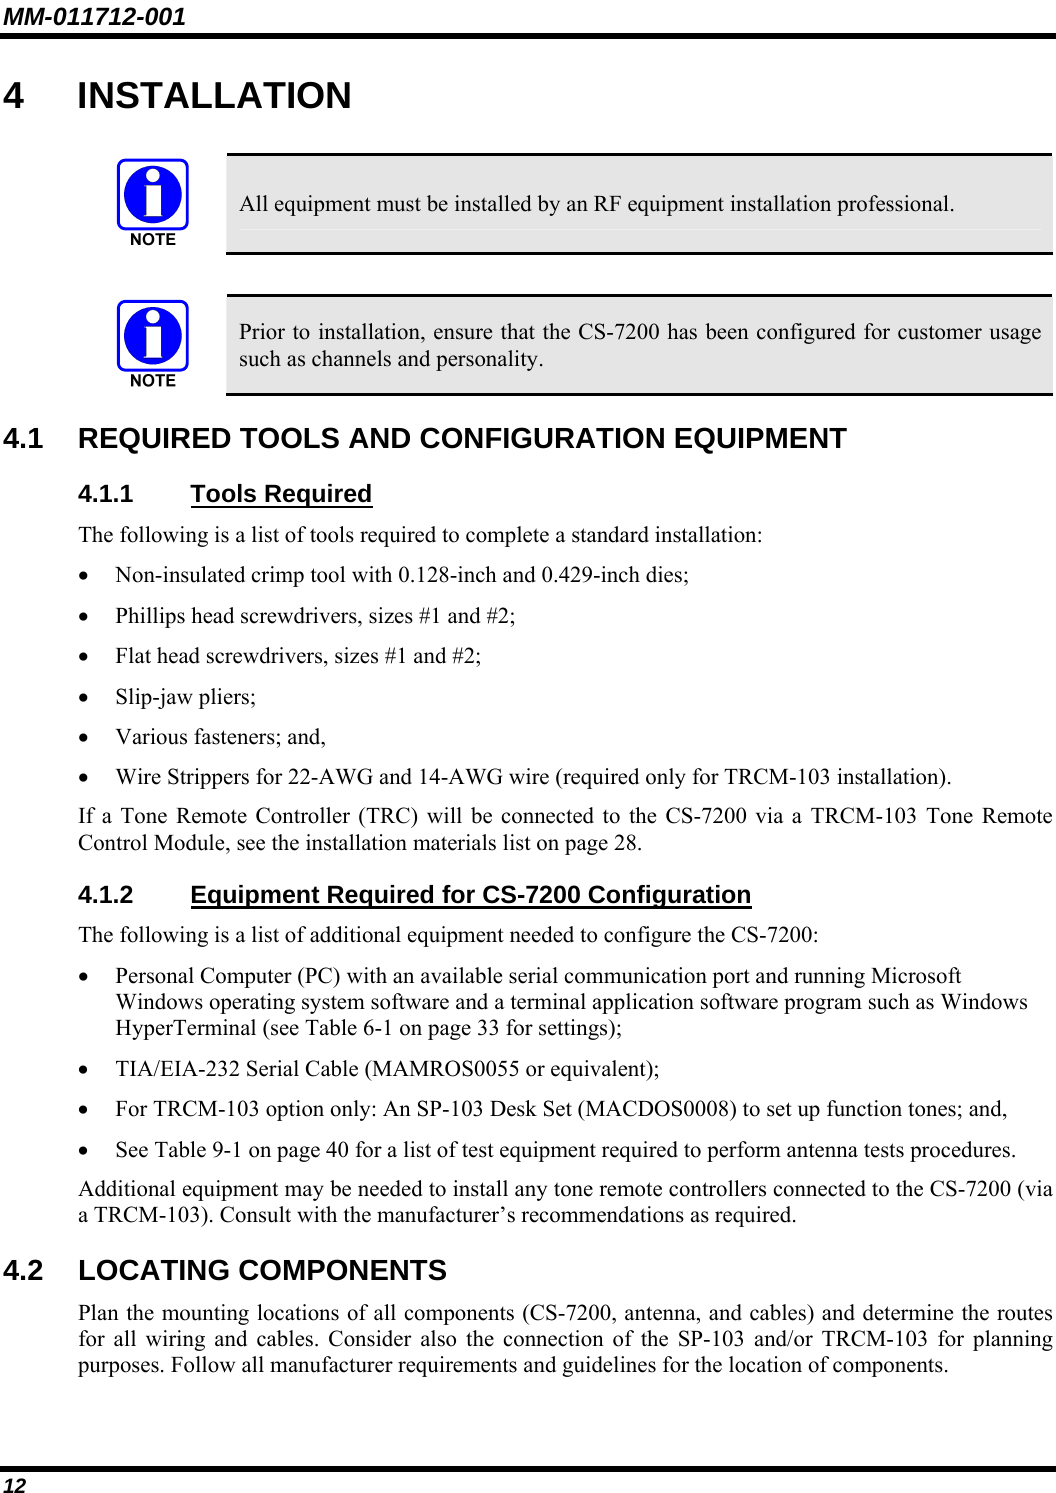 MM-011712-001 12 4 INSTALLATION   All equipment must be installed by an RF equipment installation professional.    Prior to installation, ensure that the CS-7200 has been configured for customer usage such as channels and personality. 4.1  REQUIRED TOOLS AND CONFIGURATION EQUIPMENT 4.1.1 Tools Required The following is a list of tools required to complete a standard installation: • Non-insulated crimp tool with 0.128-inch and 0.429-inch dies; • Phillips head screwdrivers, sizes #1 and #2; • Flat head screwdrivers, sizes #1 and #2; • Slip-jaw pliers; • Various fasteners; and, • Wire Strippers for 22-AWG and 14-AWG wire (required only for TRCM-103 installation). If a Tone Remote Controller (TRC) will be connected to the CS-7200 via a TRCM-103 Tone Remote Control Module, see the installation materials list on page 28. 4.1.2 Equipment Required for CS-7200 Configuration The following is a list of additional equipment needed to configure the CS-7200: • Personal Computer (PC) with an available serial communication port and running Microsoft Windows operating system software and a terminal application software program such as Windows HyperTerminal (see Table 6-1 on page 33 for settings); • TIA/EIA-232 Serial Cable (MAMROS0055 or equivalent); • For TRCM-103 option only: An SP-103 Desk Set (MACDOS0008) to set up function tones; and, • See Table 9-1 on page 40 for a list of test equipment required to perform antenna tests procedures. Additional equipment may be needed to install any tone remote controllers connected to the CS-7200 (via a TRCM-103). Consult with the manufacturer’s recommendations as required. 4.2 LOCATING COMPONENTS Plan the mounting locations of all components (CS-7200, antenna, and cables) and determine the routes for all wiring and cables. Consider also the connection of the SP-103 and/or TRCM-103 for planning purposes. Follow all manufacturer requirements and guidelines for the location of components.  